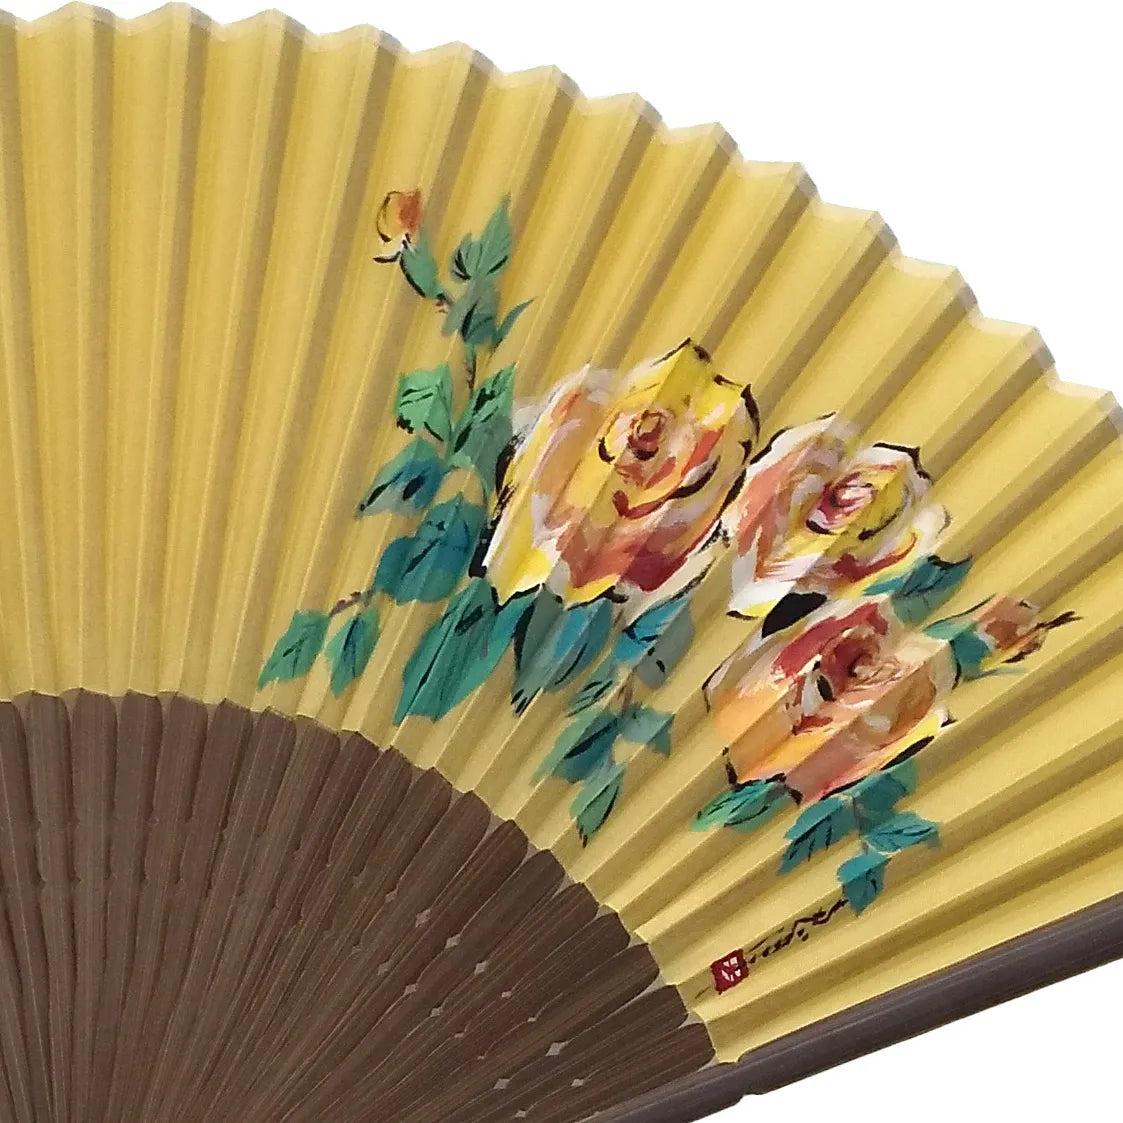 Silk fan, yellow narcissus, with rose illustration, one of a kind, in paulownia box